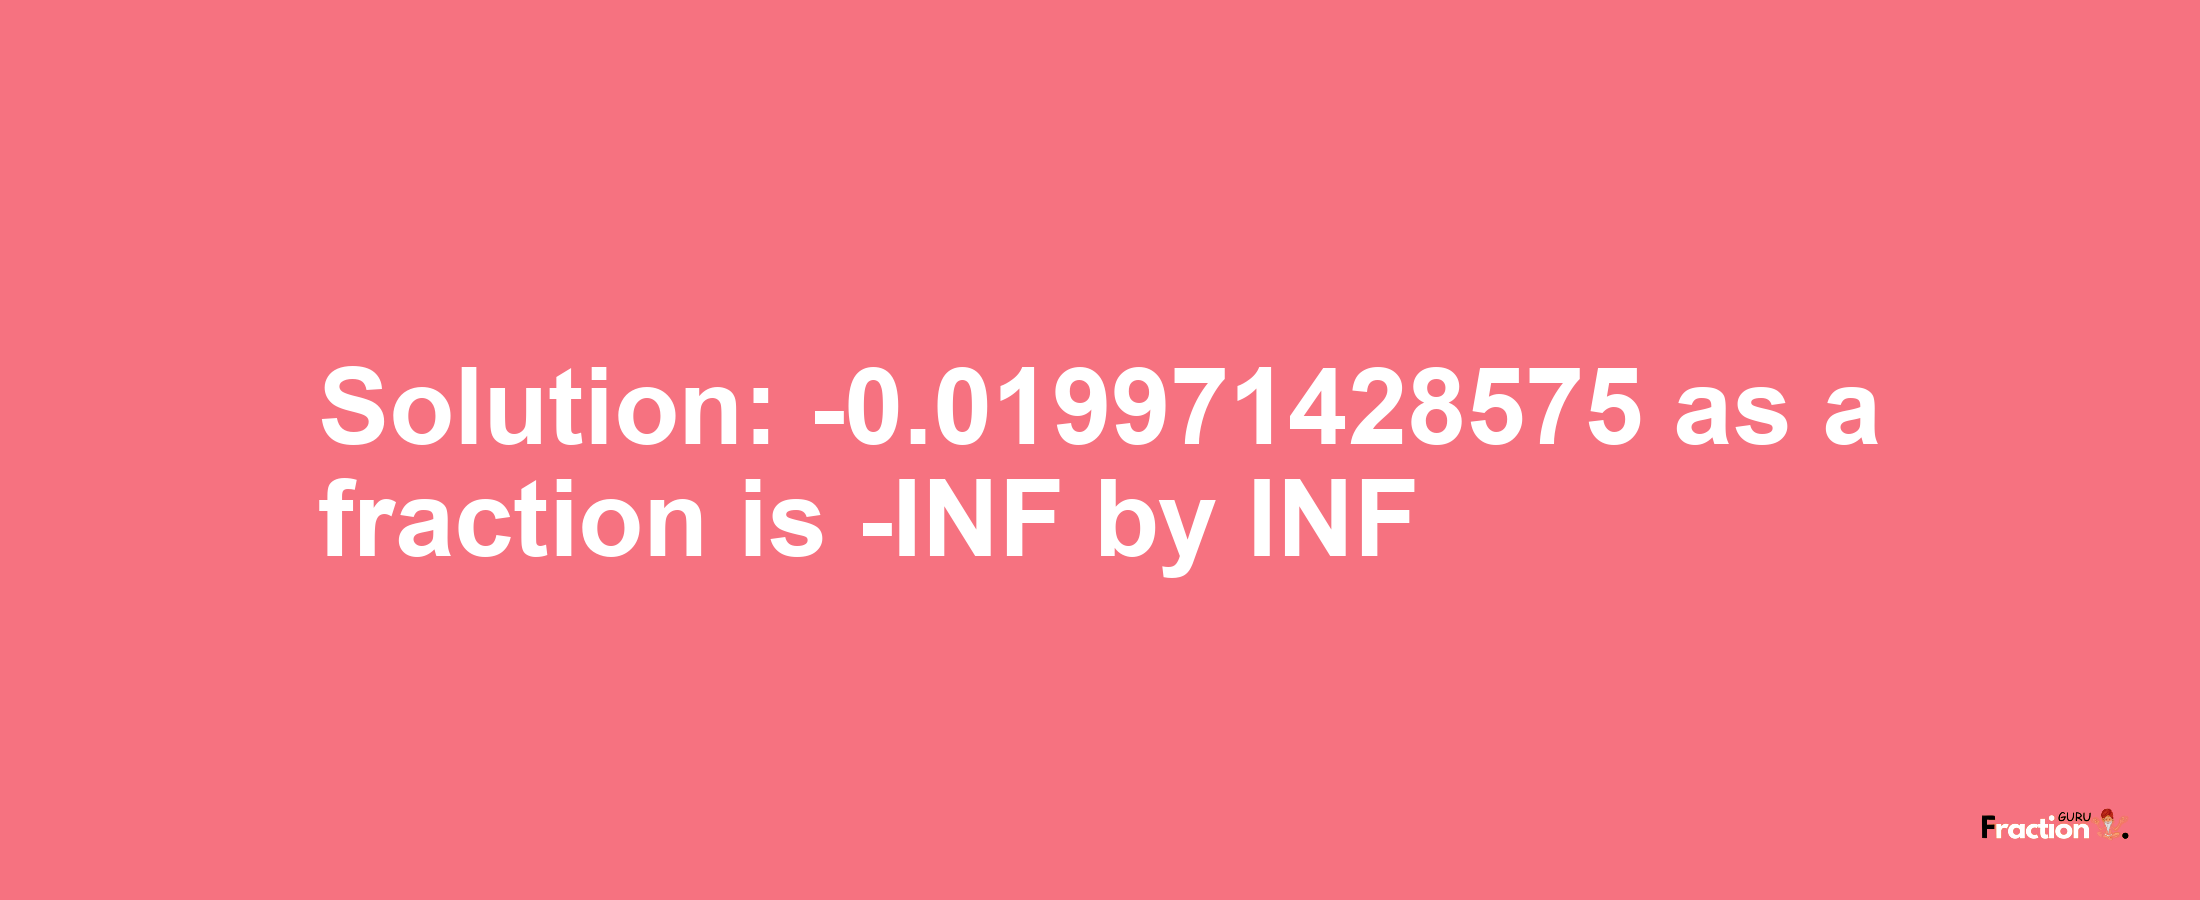 Solution:-0.019971428575 as a fraction is -INF/INF